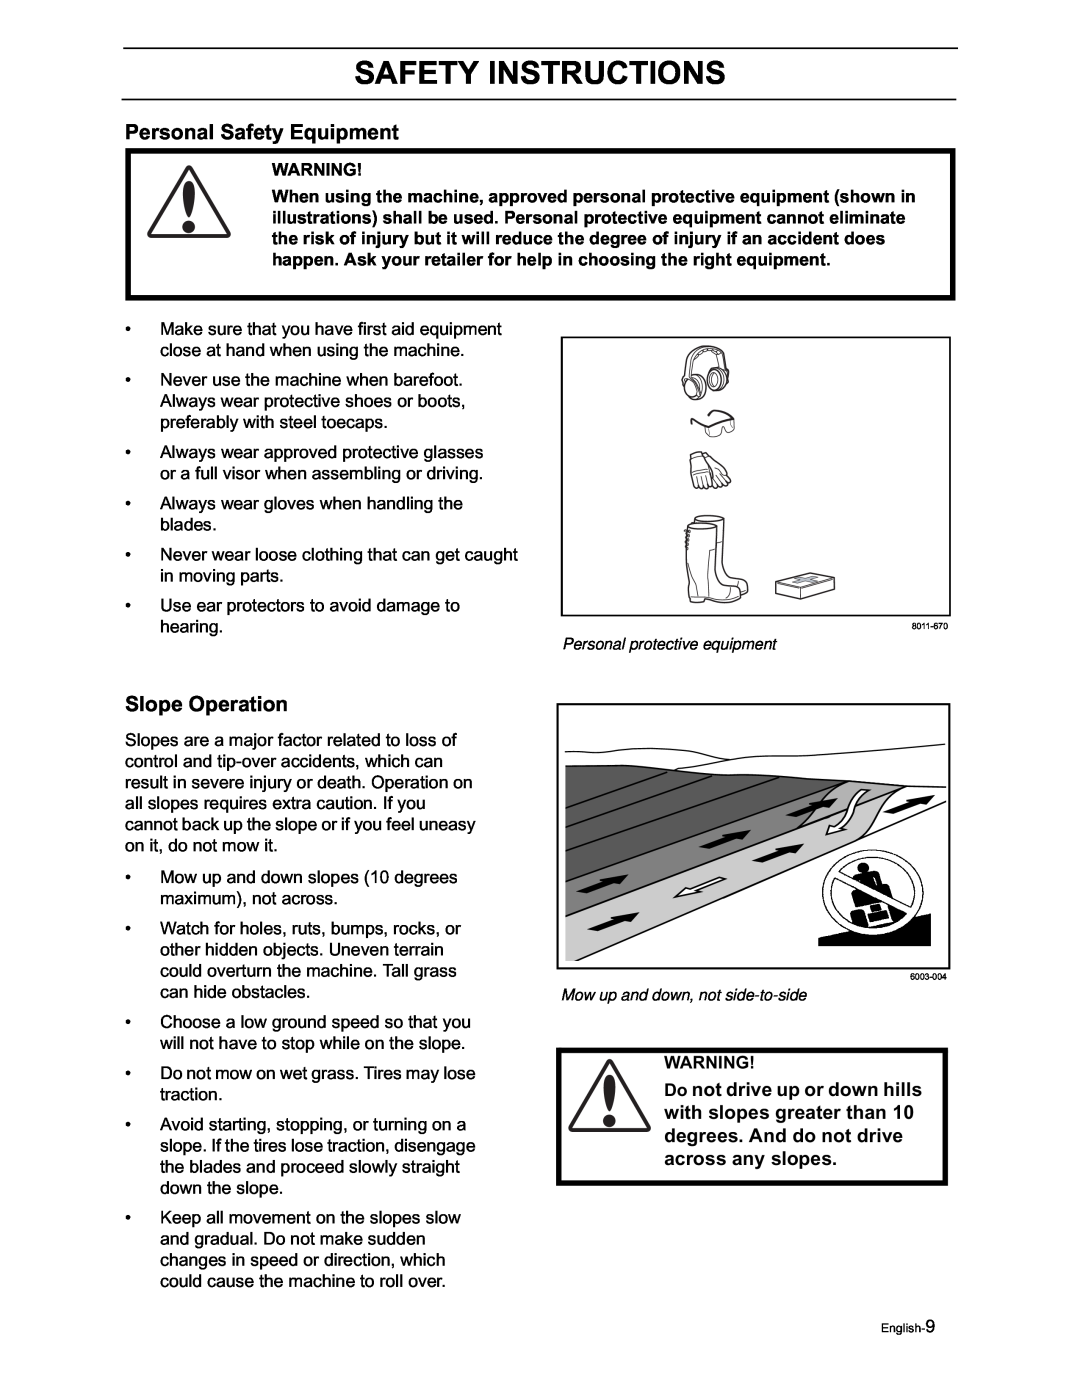 Yazoo/Kees ZVKH61273, ZVKW52253 manual Personal Safety Equipment, Slope Operation, Safety Instructions 